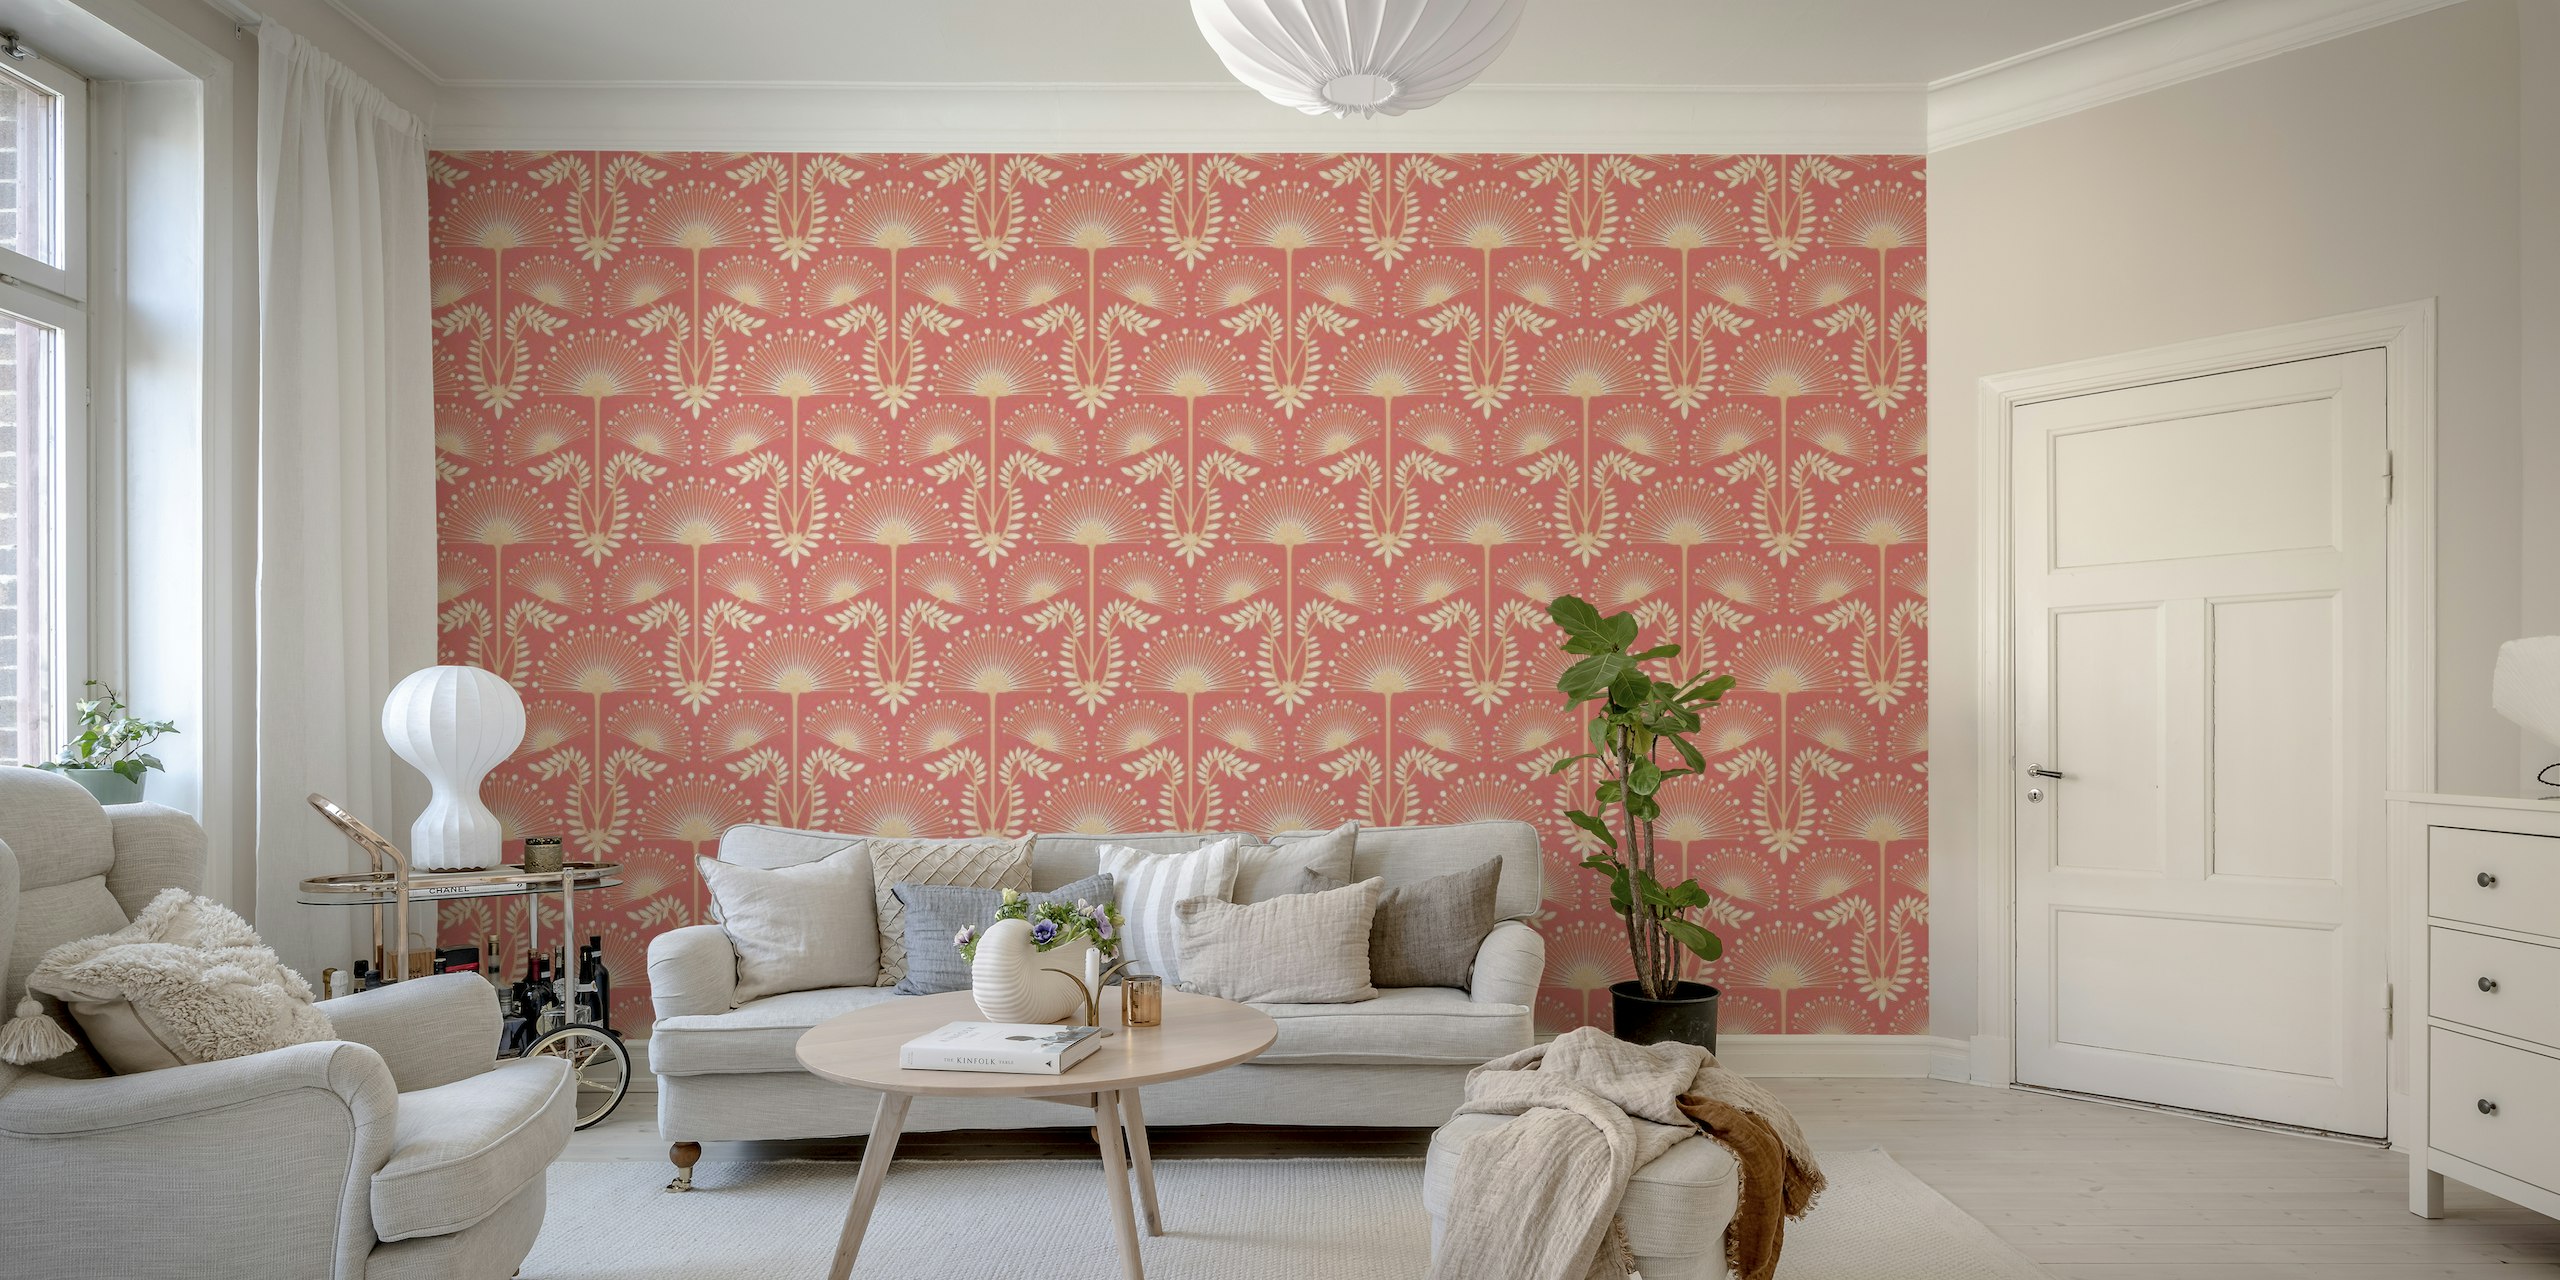 MIMOSA Art Deco Floral - Peach Coral - Large ταπετσαρία